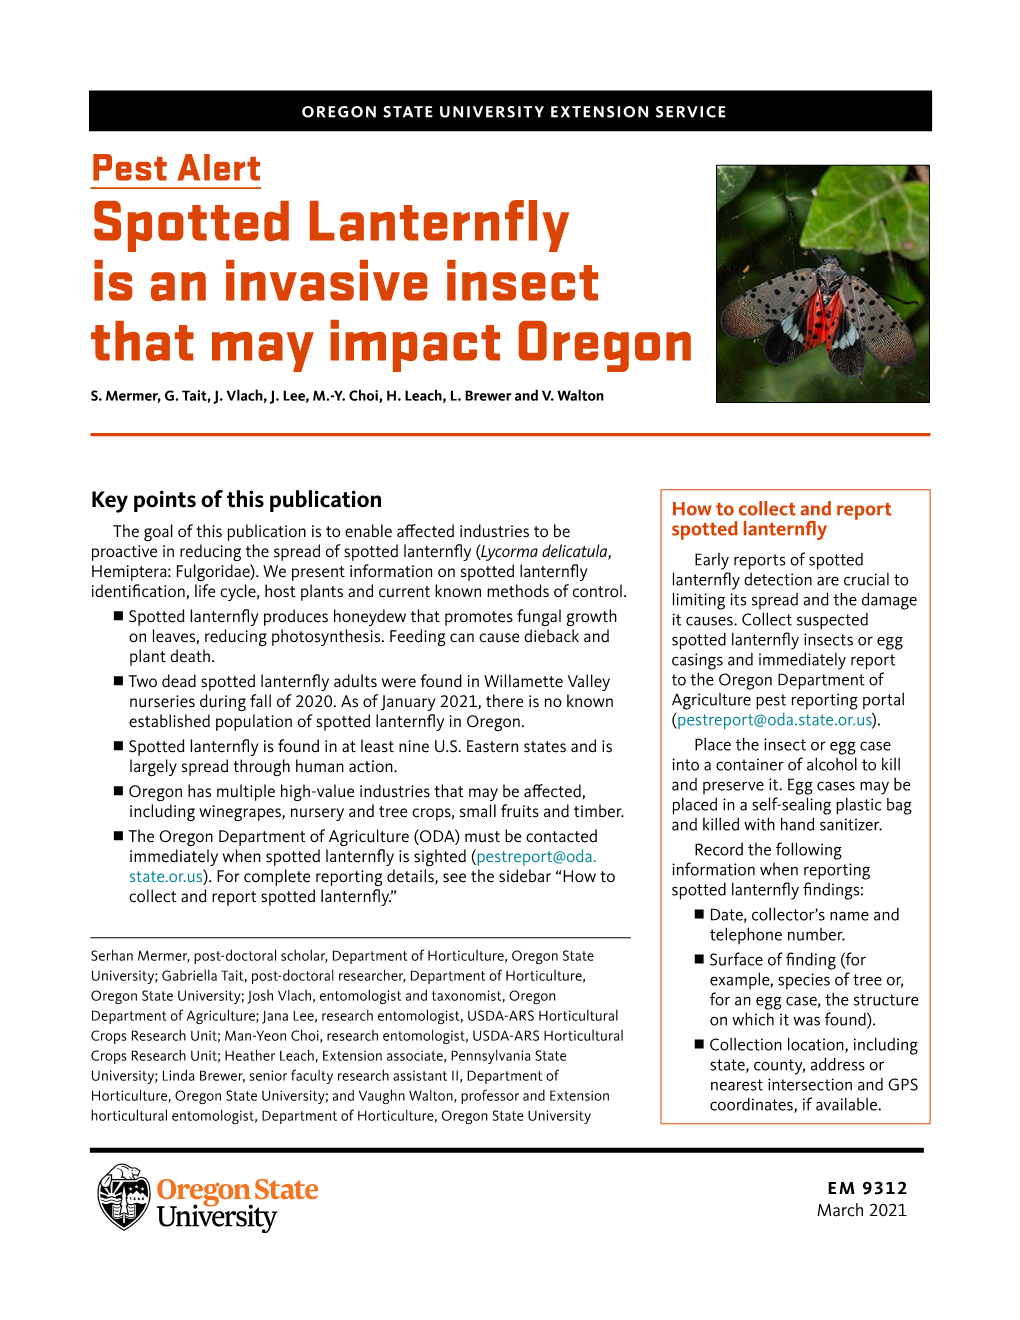 Spotted Lanternfly Is an Invasive Insect That May Impact Oregon S